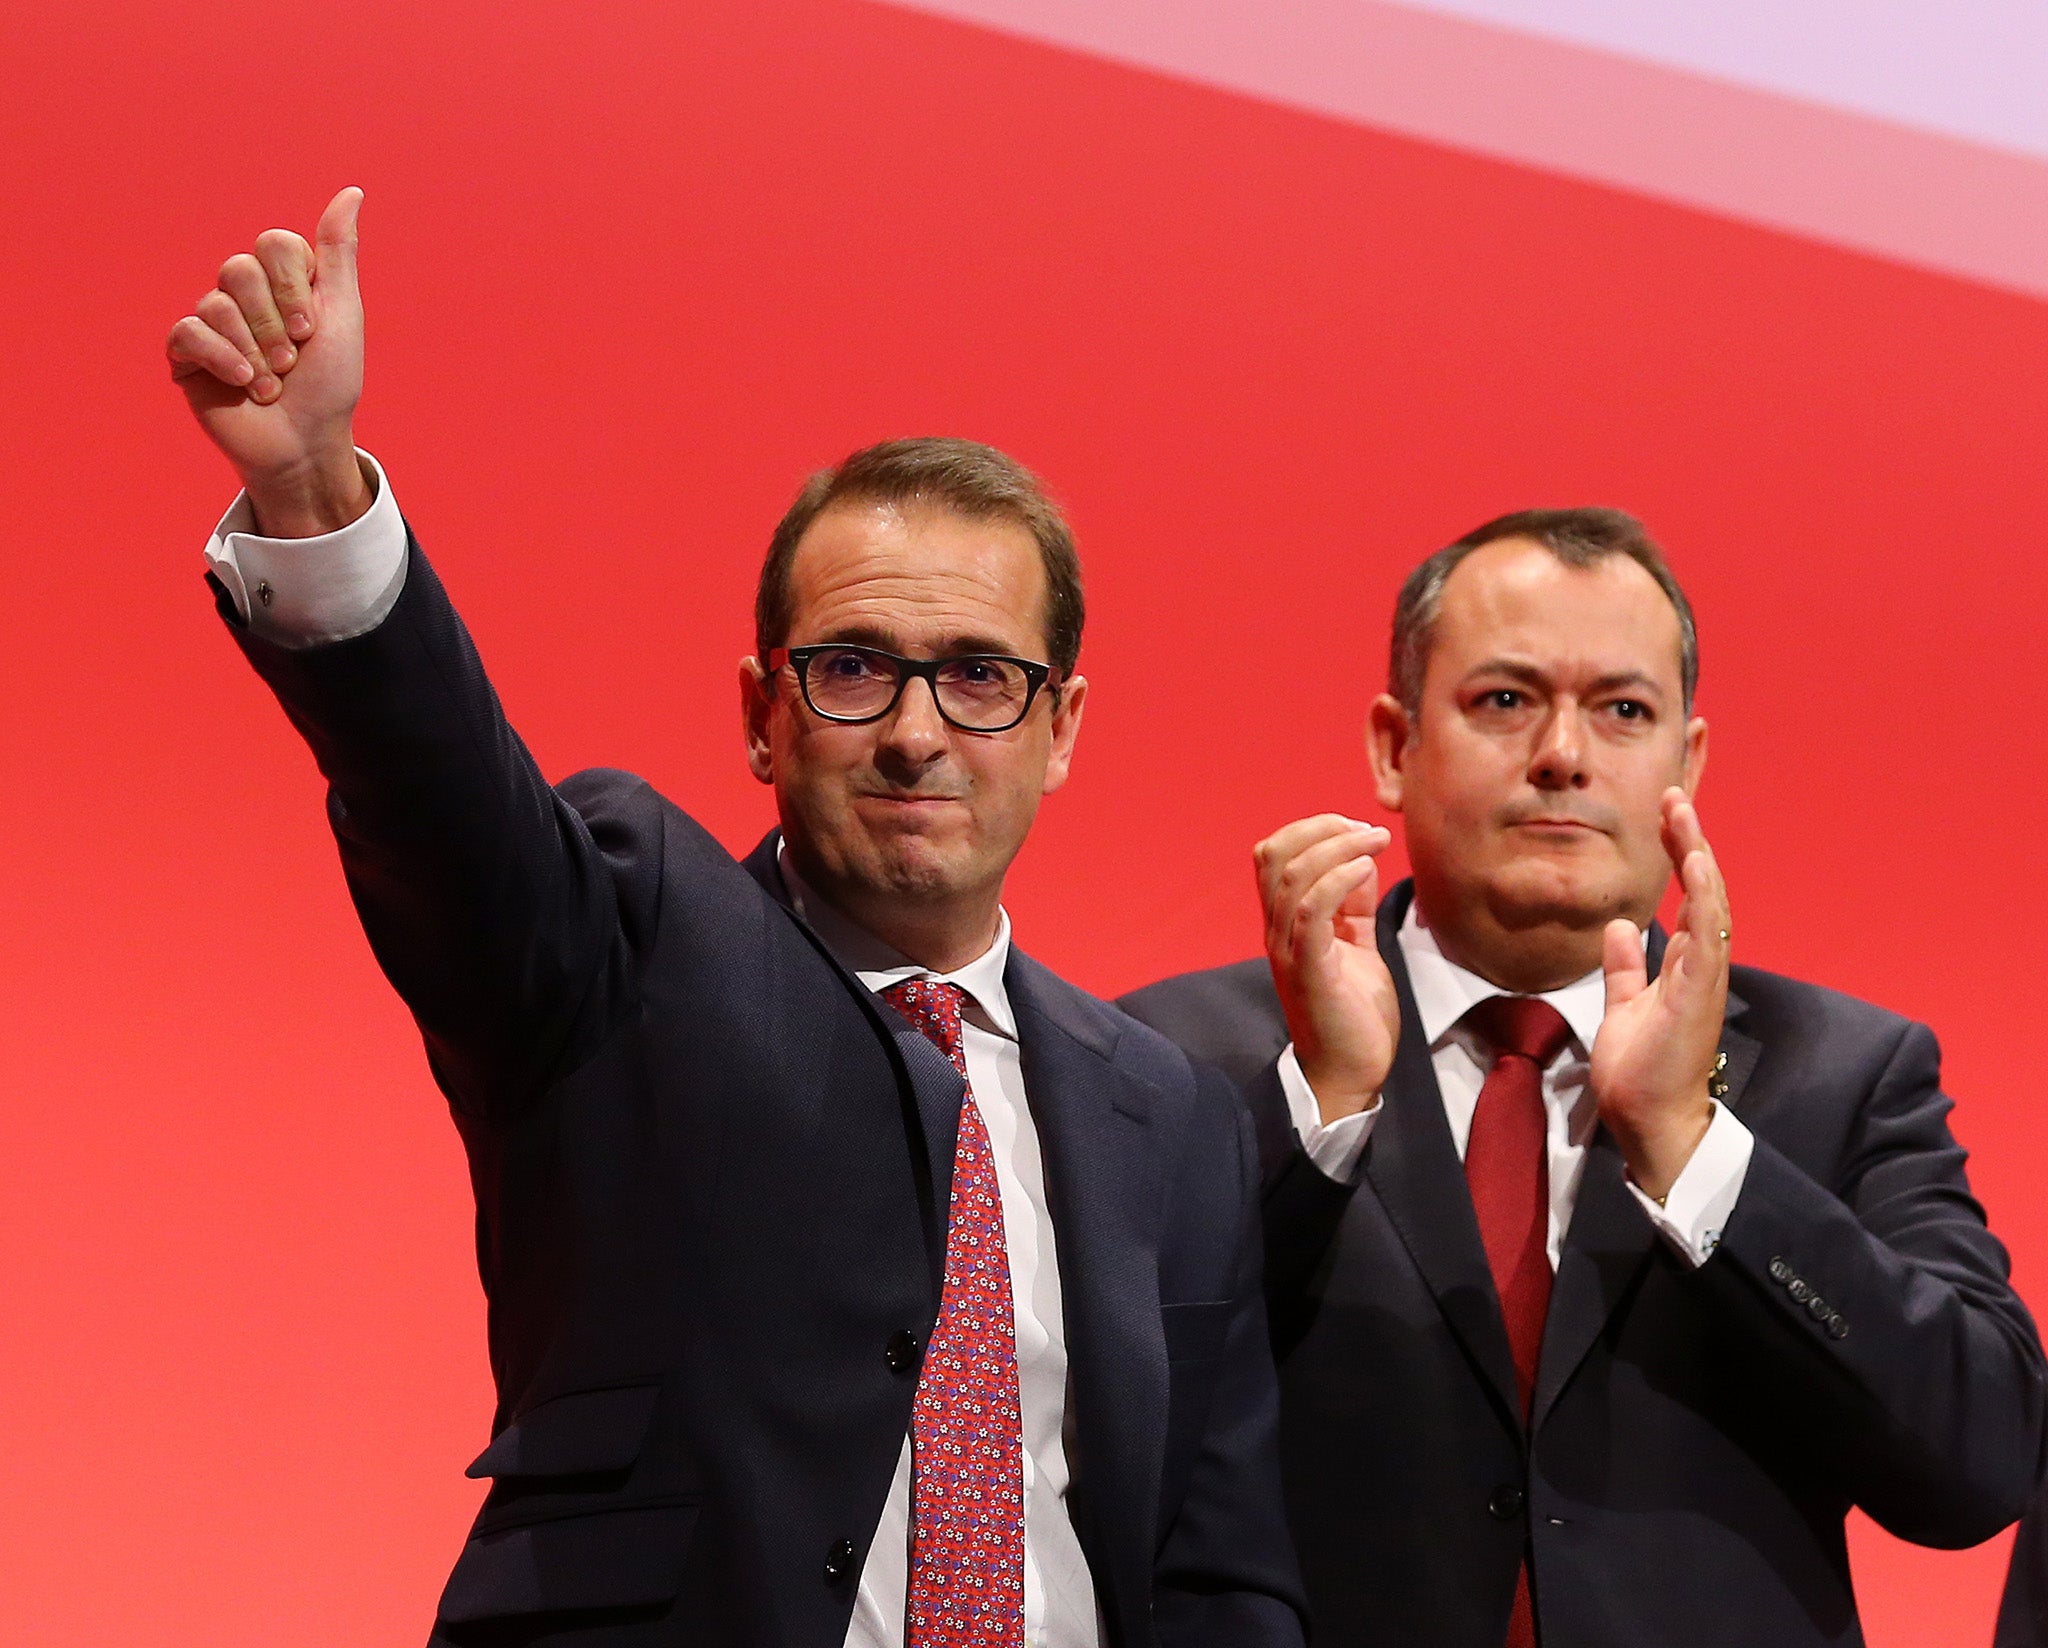 Shadow work and pensions secretary Owen Smith, left, has been touted as a possible leadership candidate from the 'soft left'